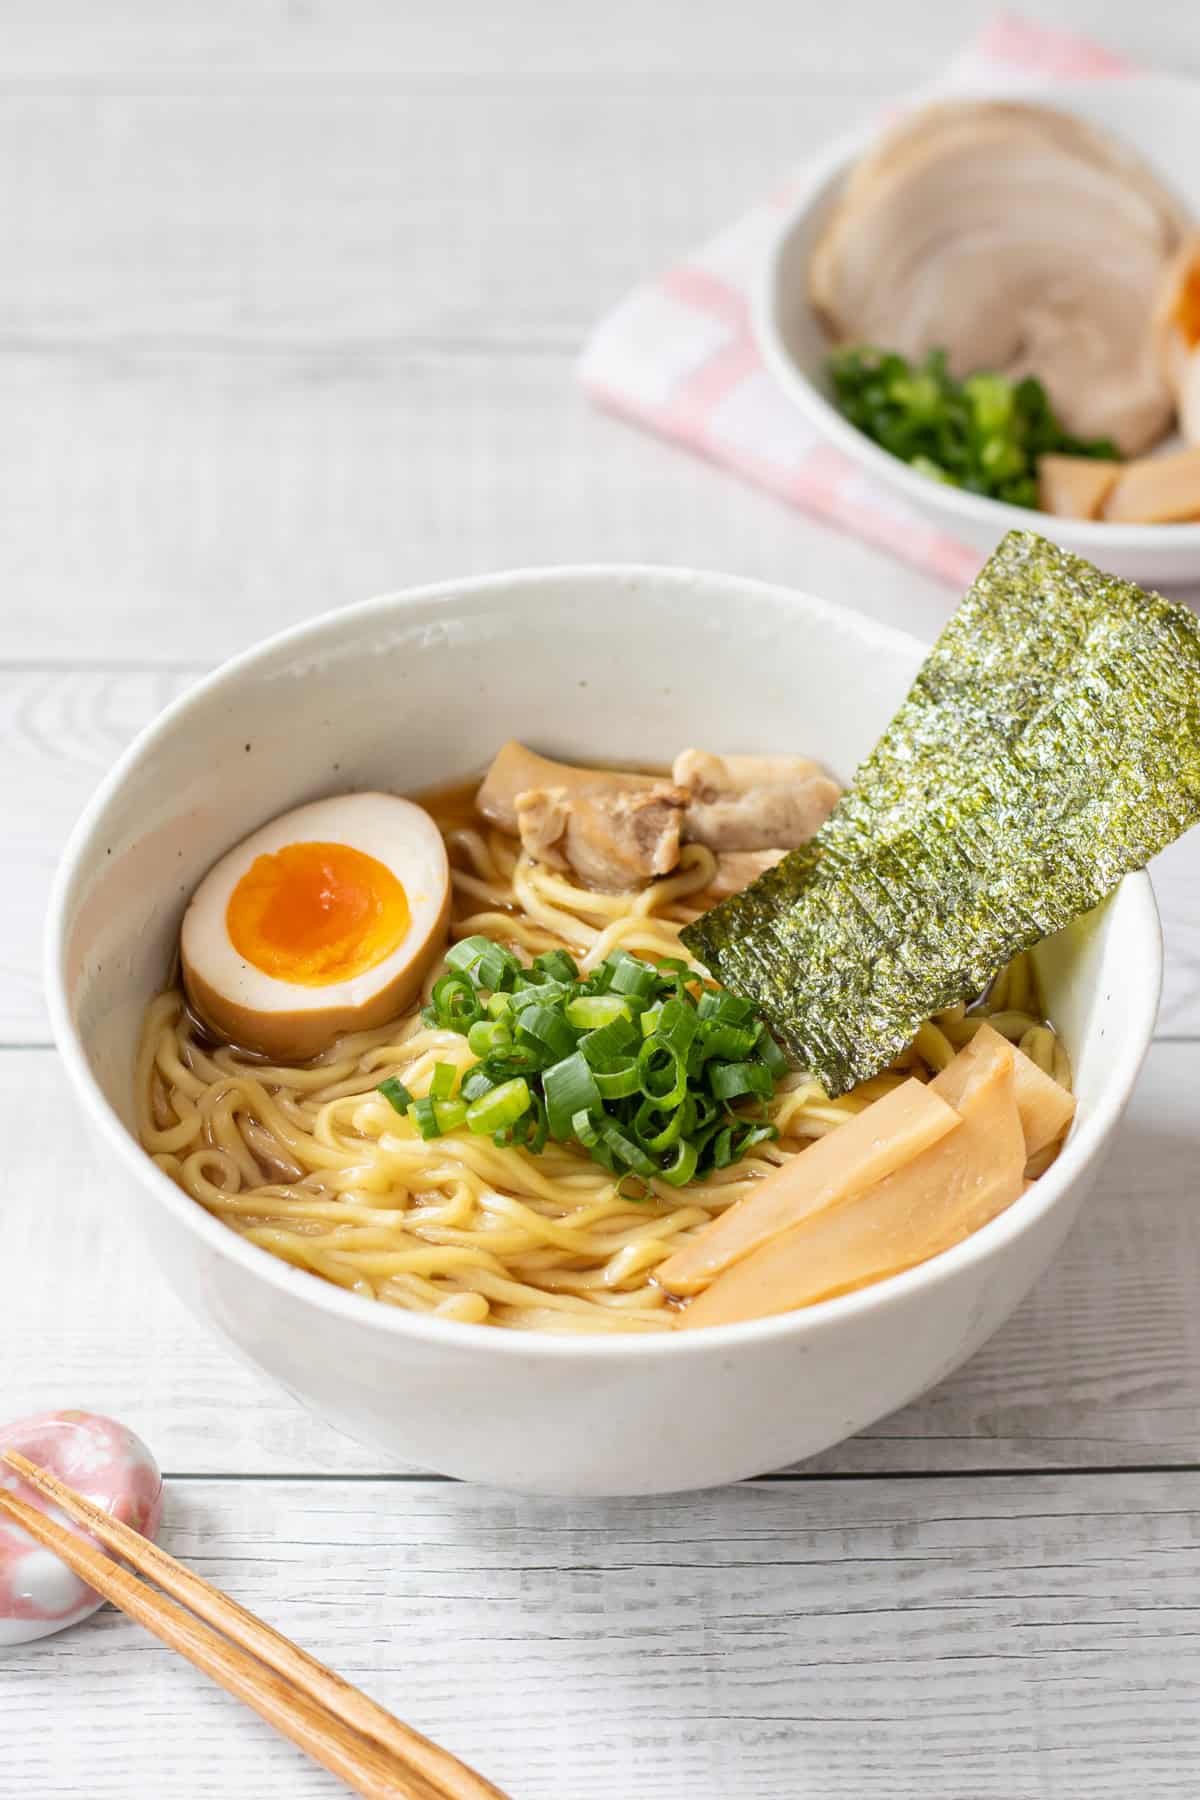 How to Improve Instant Ramen - Japanese Techniques and Hacks